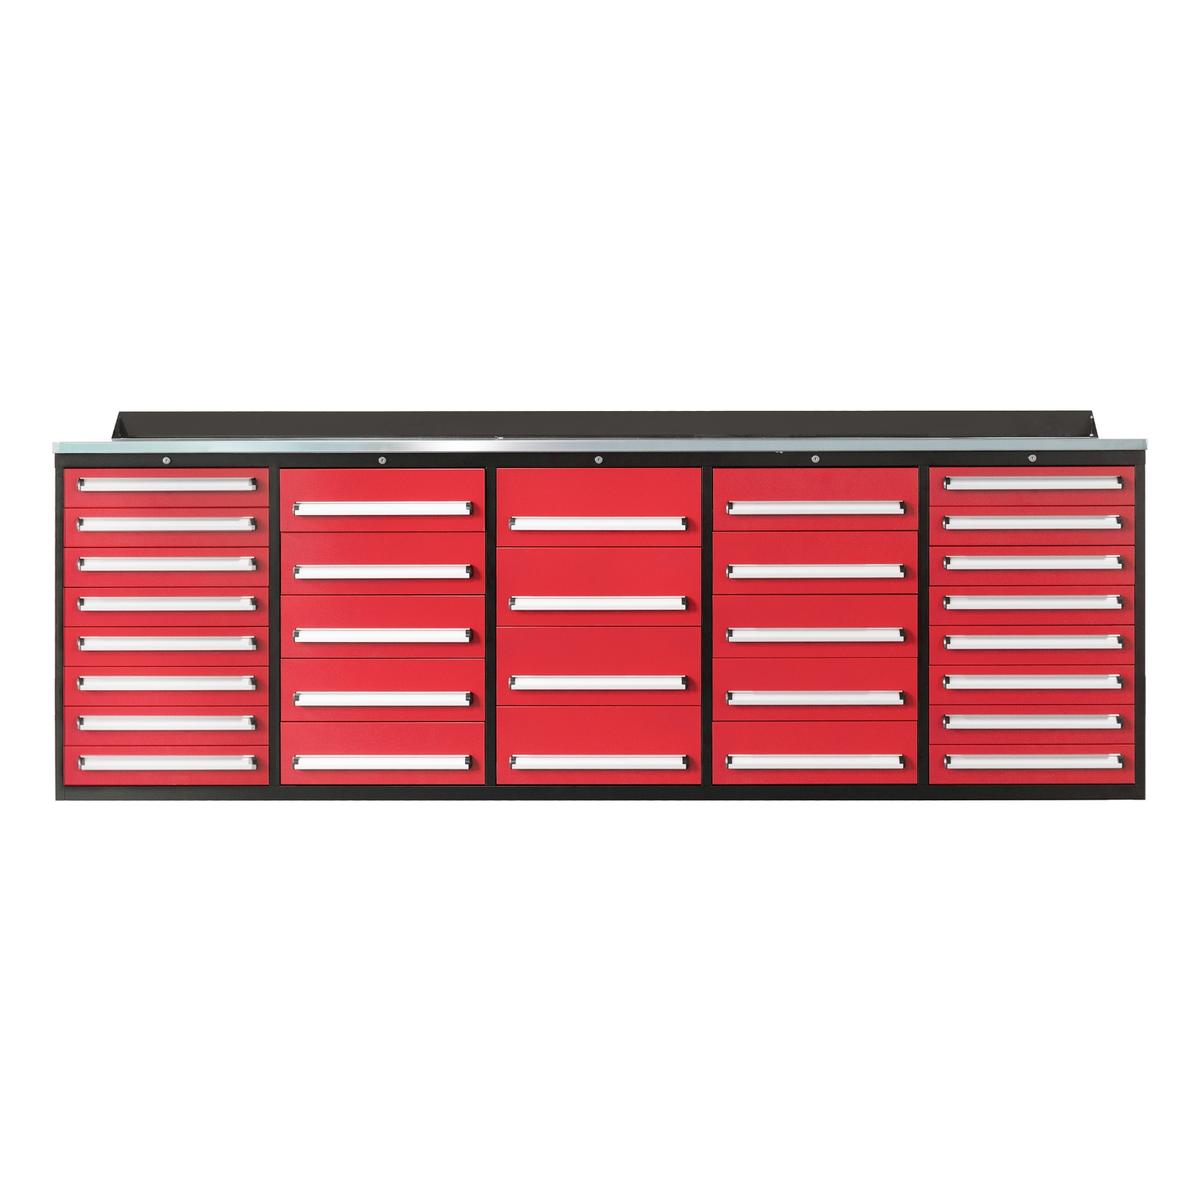 Value Industrial 10FT-30D Workbench Cabinets - 10 foot wide - 30 drawers